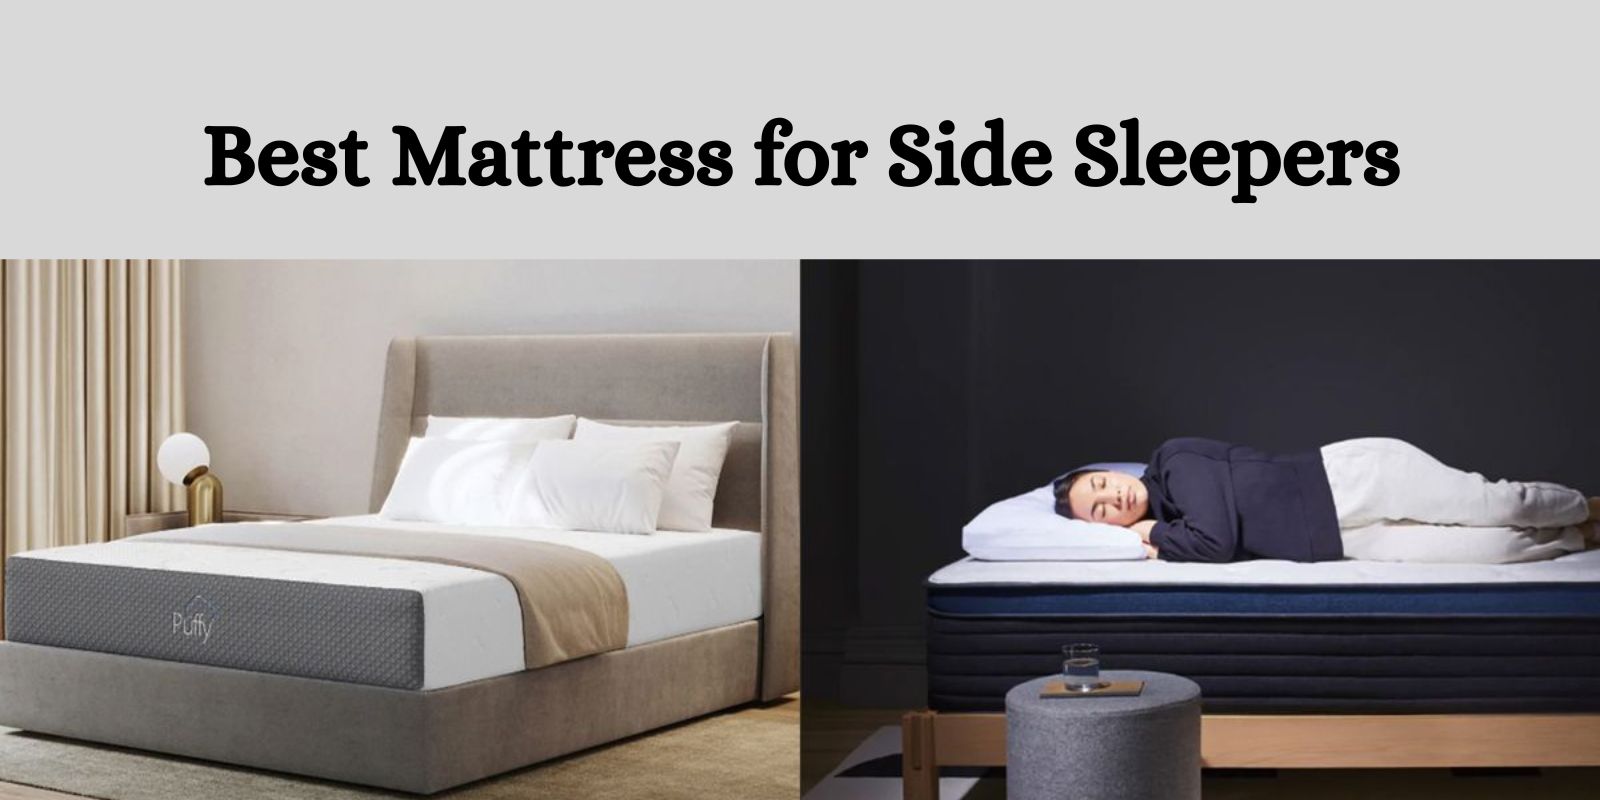 The Ultimate Guide to Choosing the Best Mattress for Side Sleepers